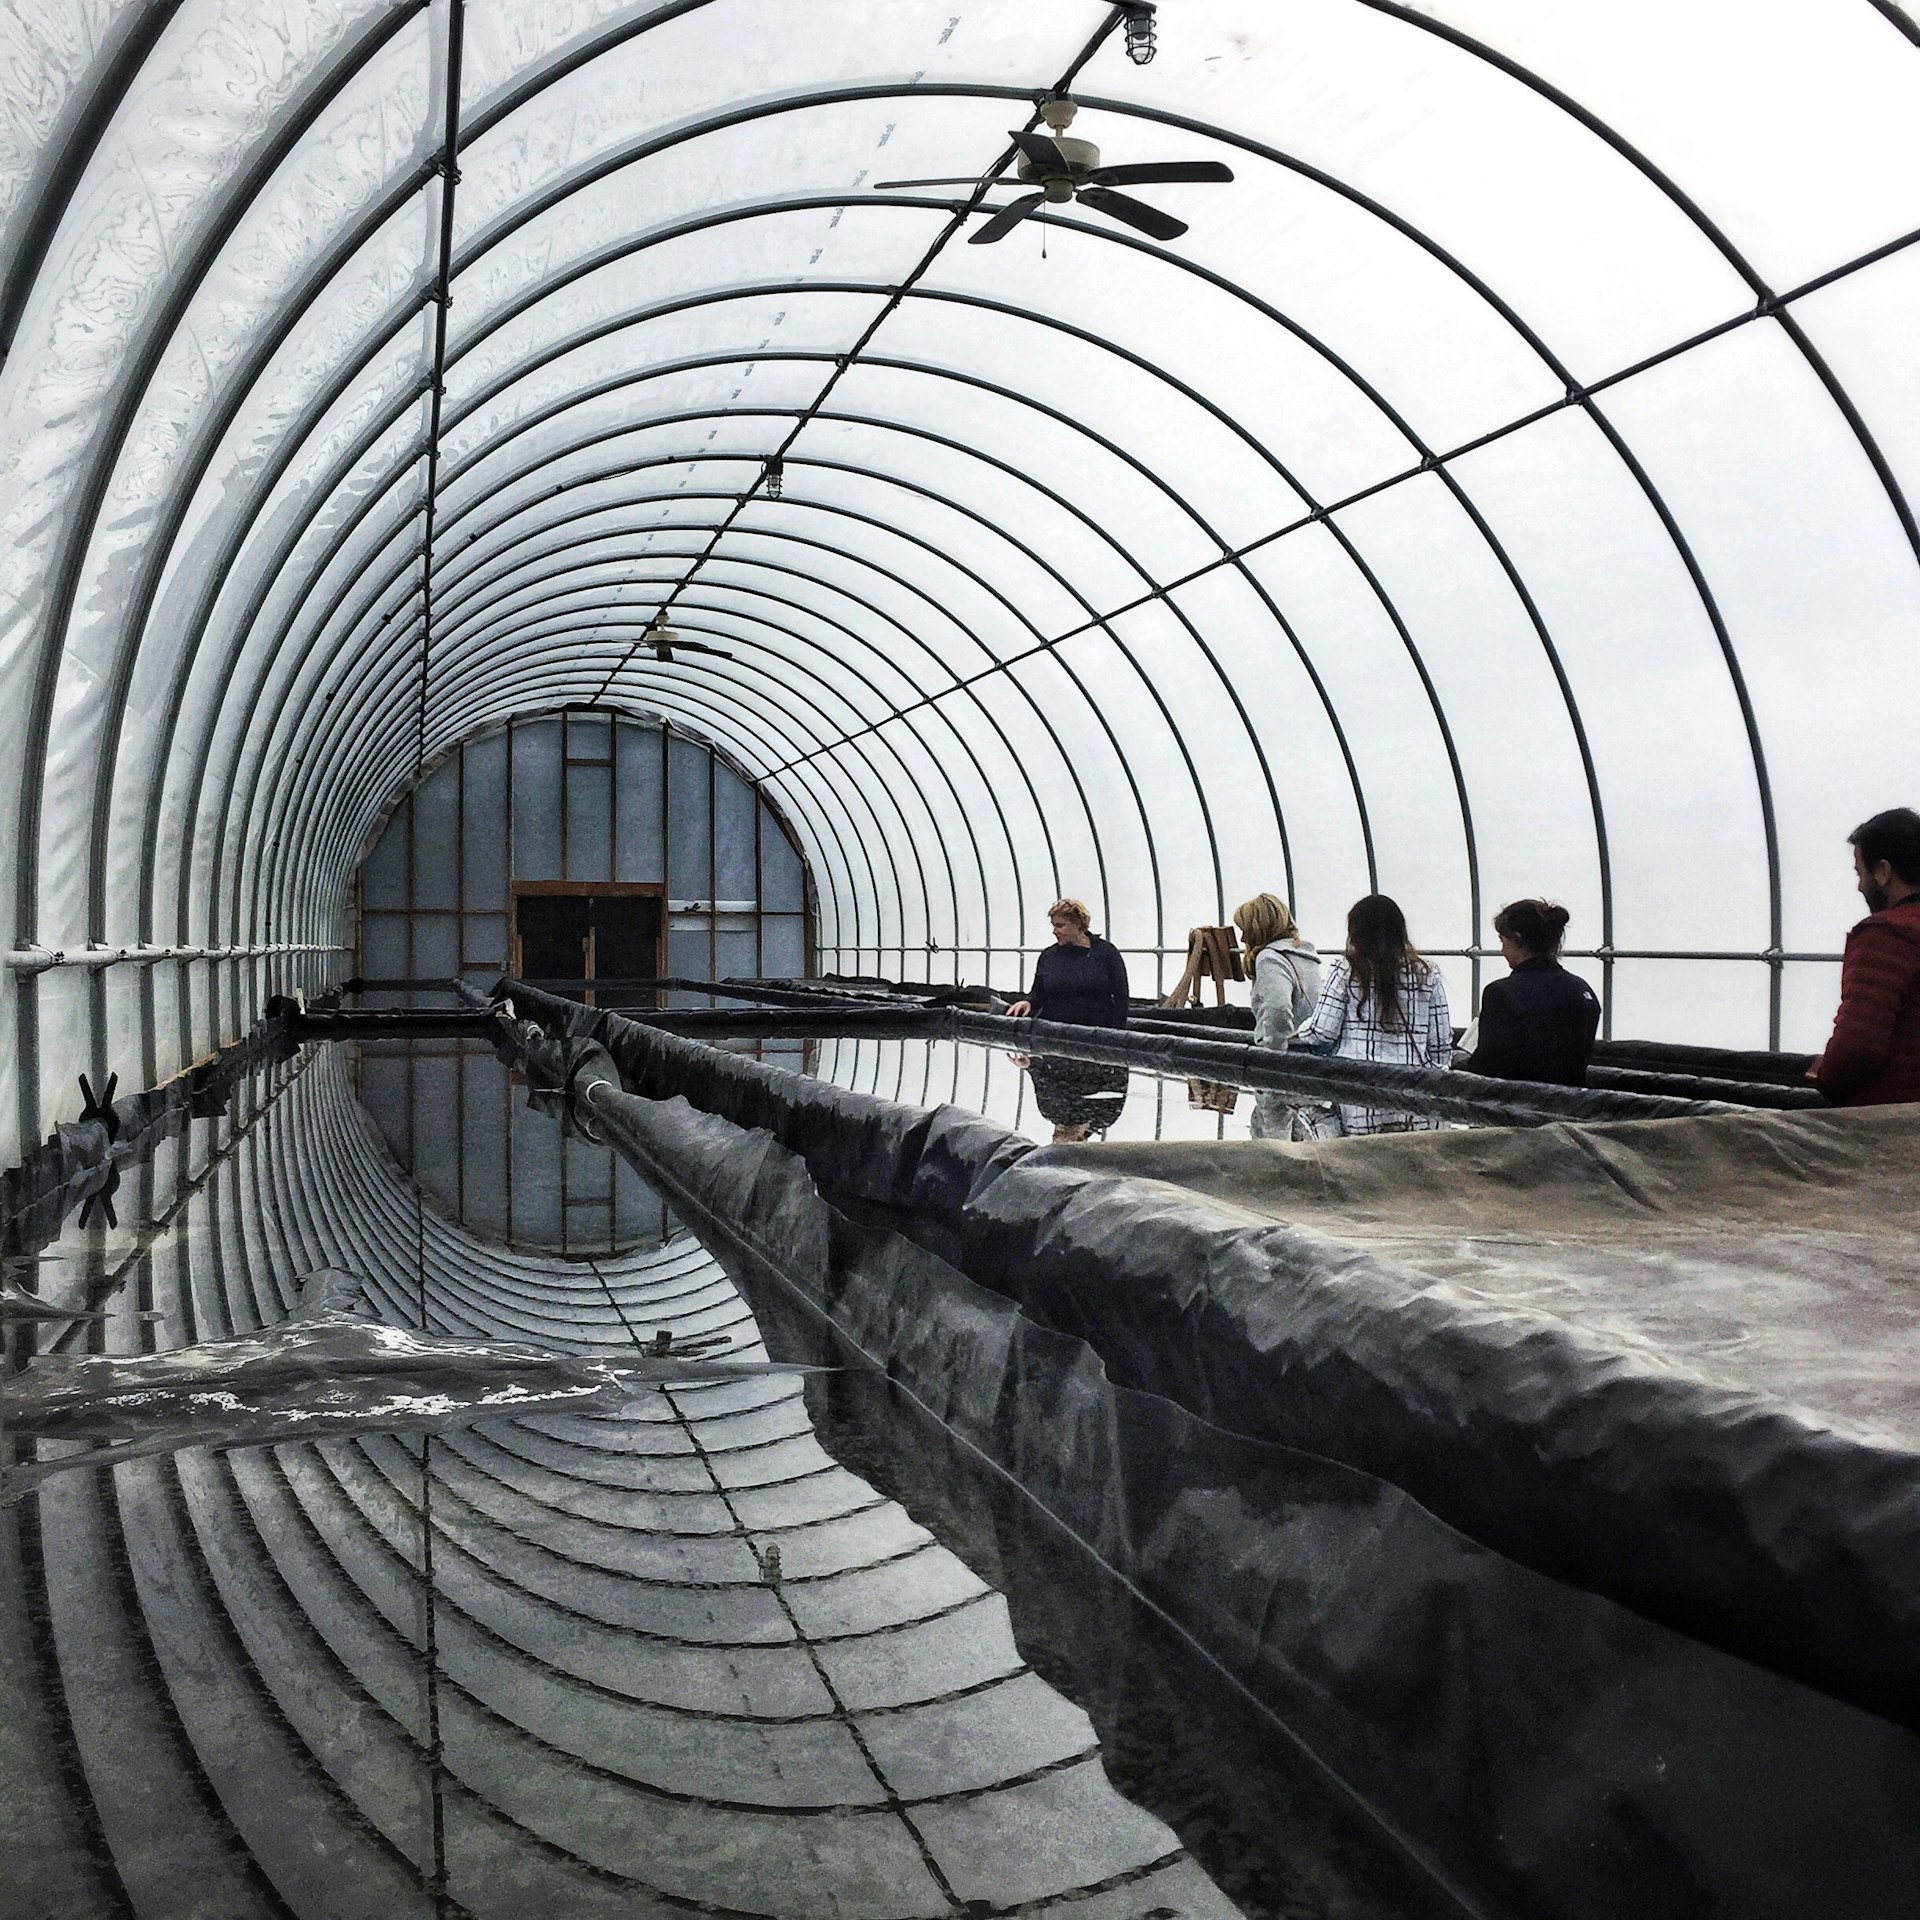 A row of people stand in a long tunnel of plastic sheeting and flexible semi-circular ribs next to a long trough of water from an underground salt lake. The images is in color, but is mostly made up of grey tones as the light filters through the plastic and the water reflects the surrounding structure